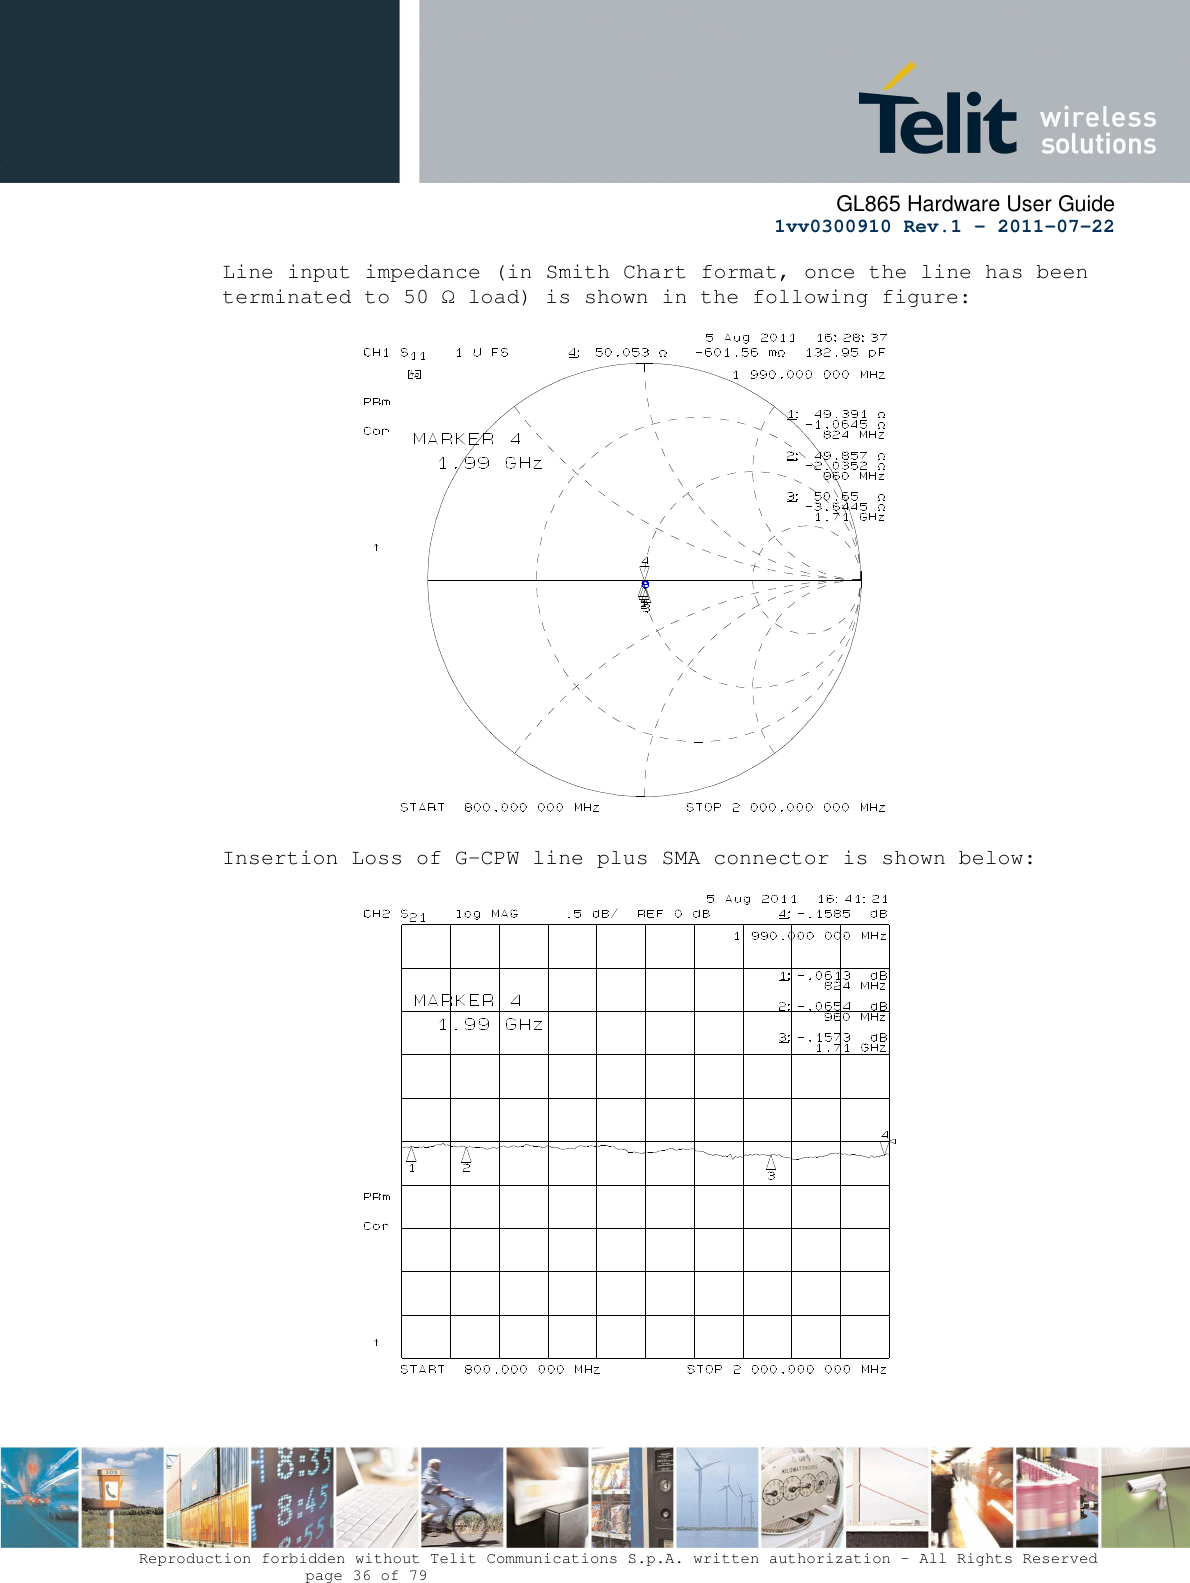      GL865 Hardware User Guide     1vv0300910 Rev.1 – 2011-07-22       Reproduction forbidden without Telit Communications S.p.A. written authorization - All Rights Reserved    page 36 of 79  Line input impedance (in Smith Chart format, once the line has been terminated to 50 Ω load) is shown in the following figure:                       Insertion Loss of G-CPW line plus SMA connector is shown below:                        